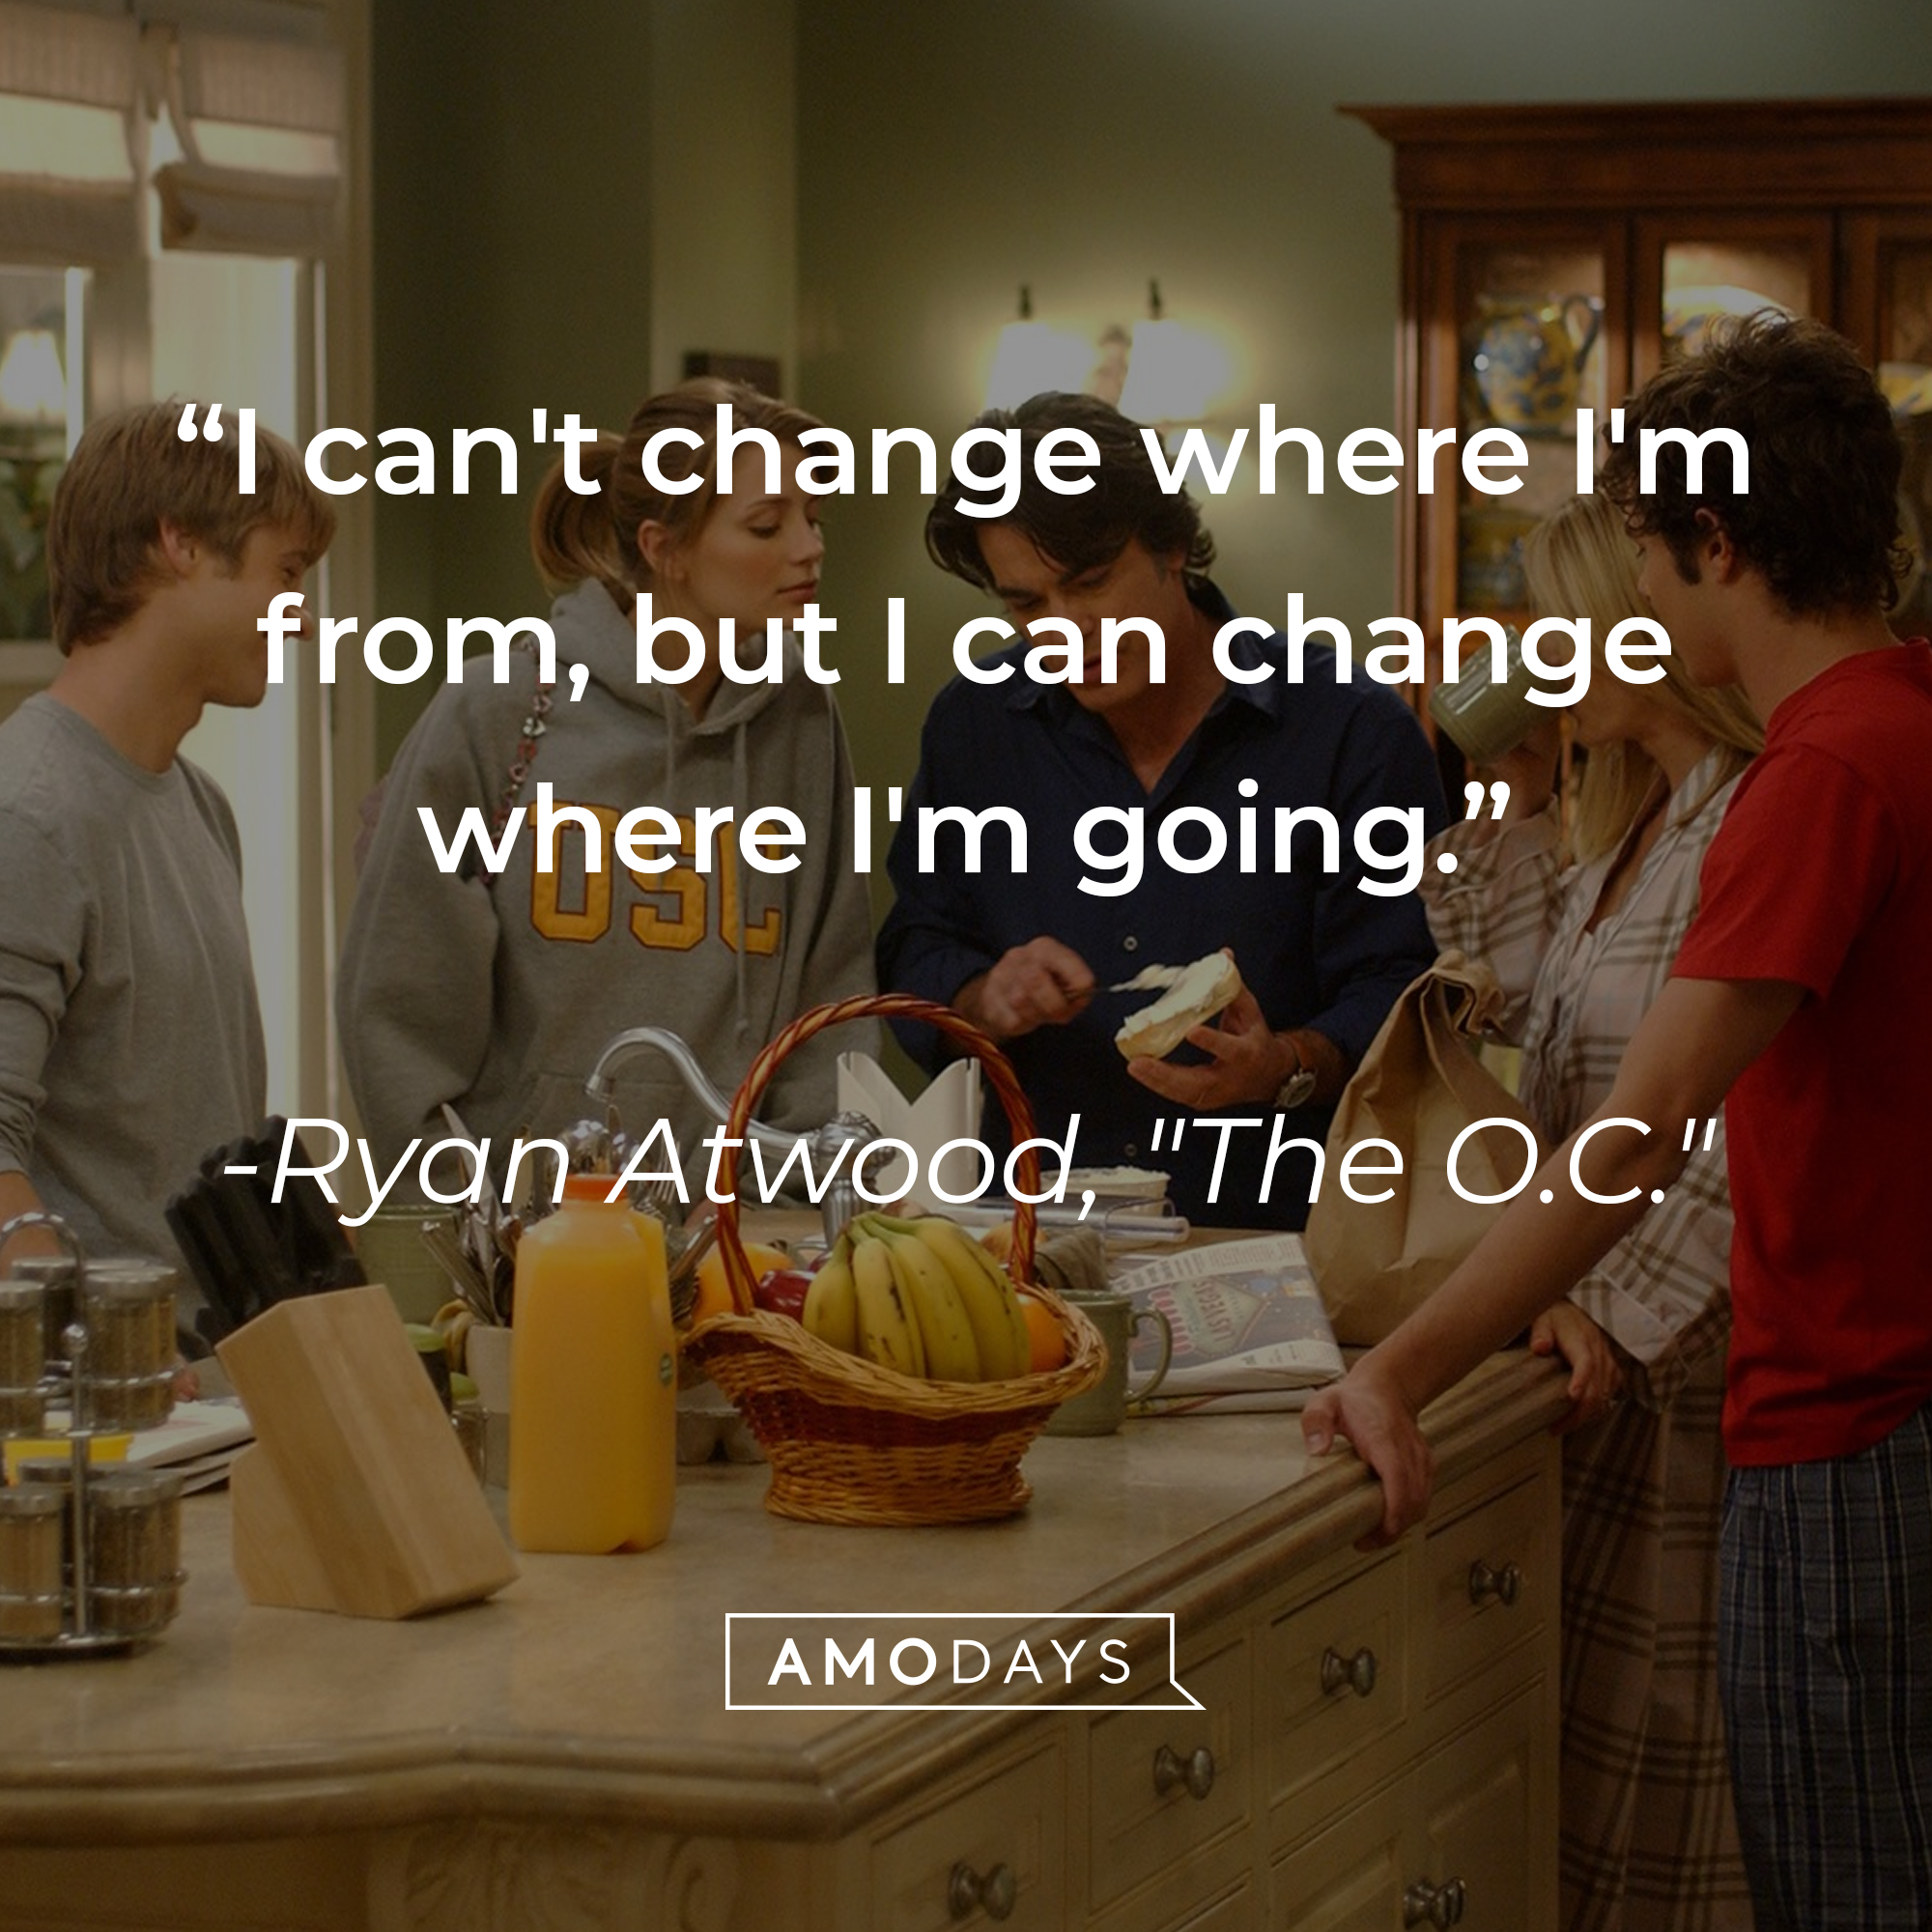 Ryan Atwood's quote: "I can't change where I'm from, but I can change where I'm going." | Source: Facebook.com/TheOC